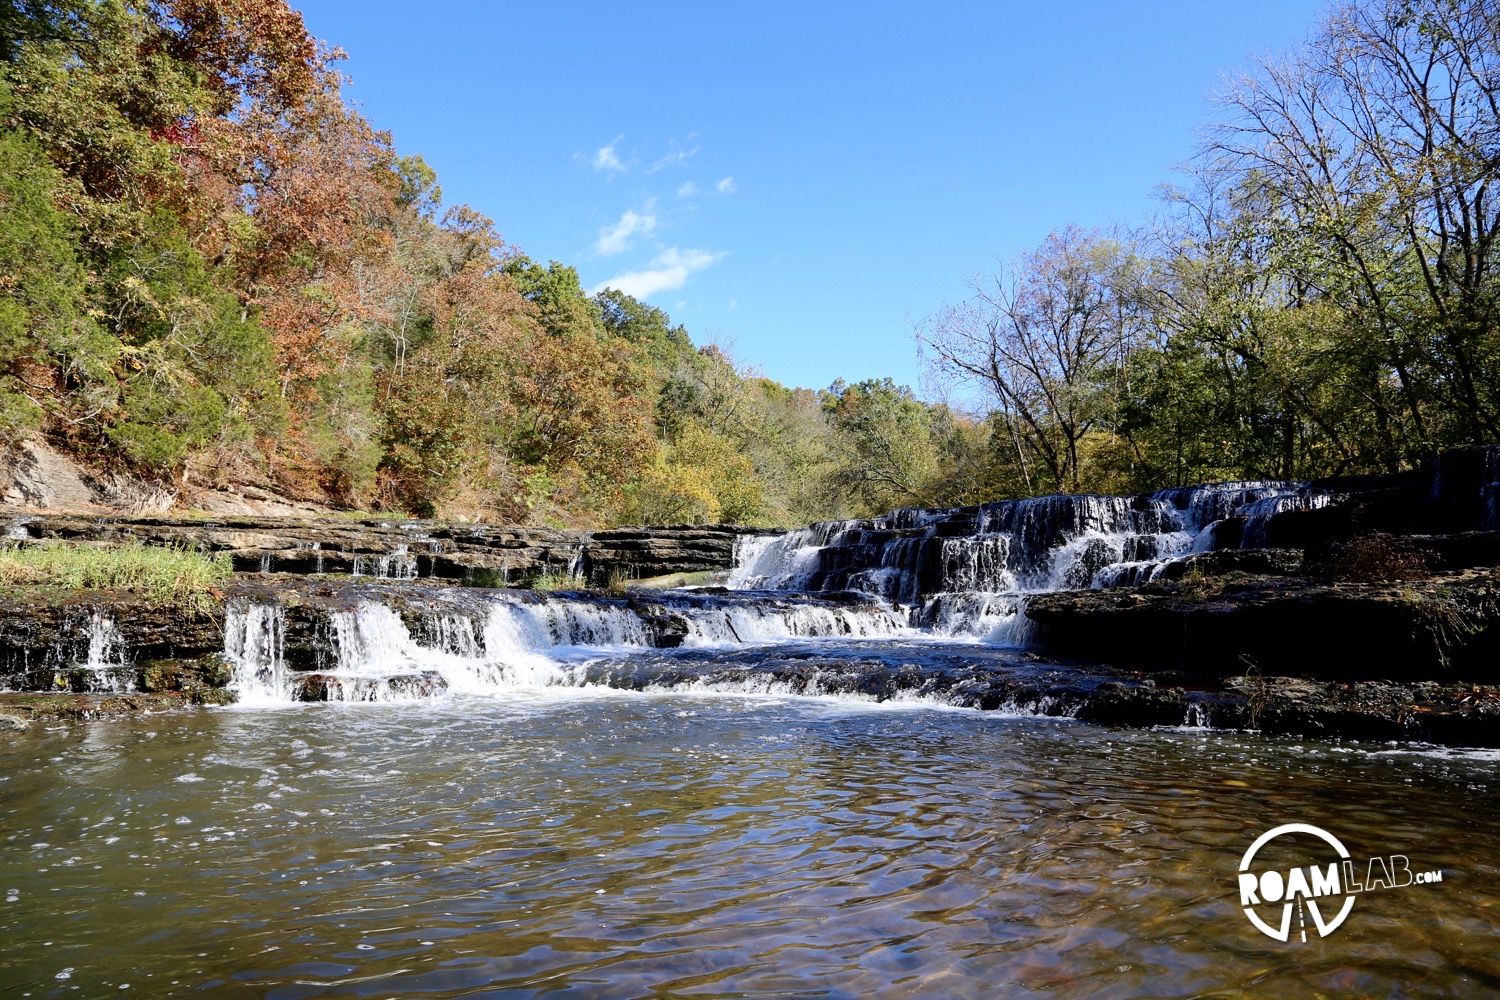 Burgess Falls State Park is everything you would expect of a park named after it's series of four, magnificent waterfalls. One trail will take you by each, successively more grand water feature, culminating at the base of the Burgess Falls.